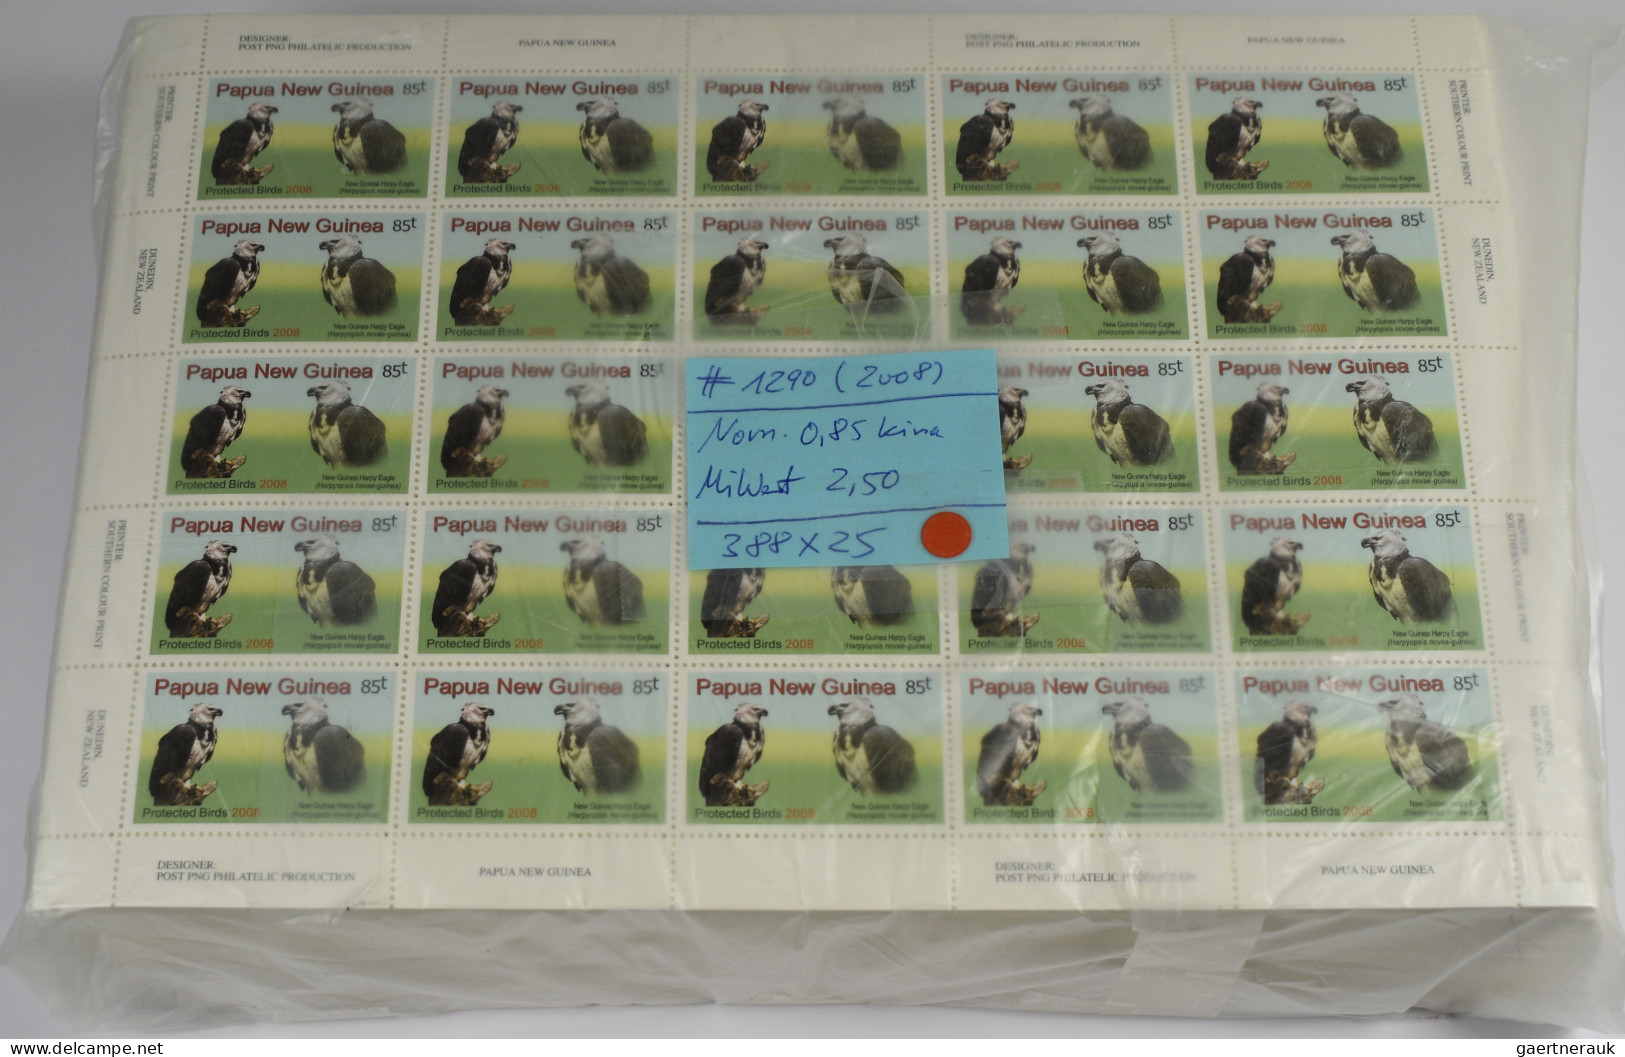 Papua New Guinea: 2000/2008. Lot with MNH stamps in quantities from a few hundre